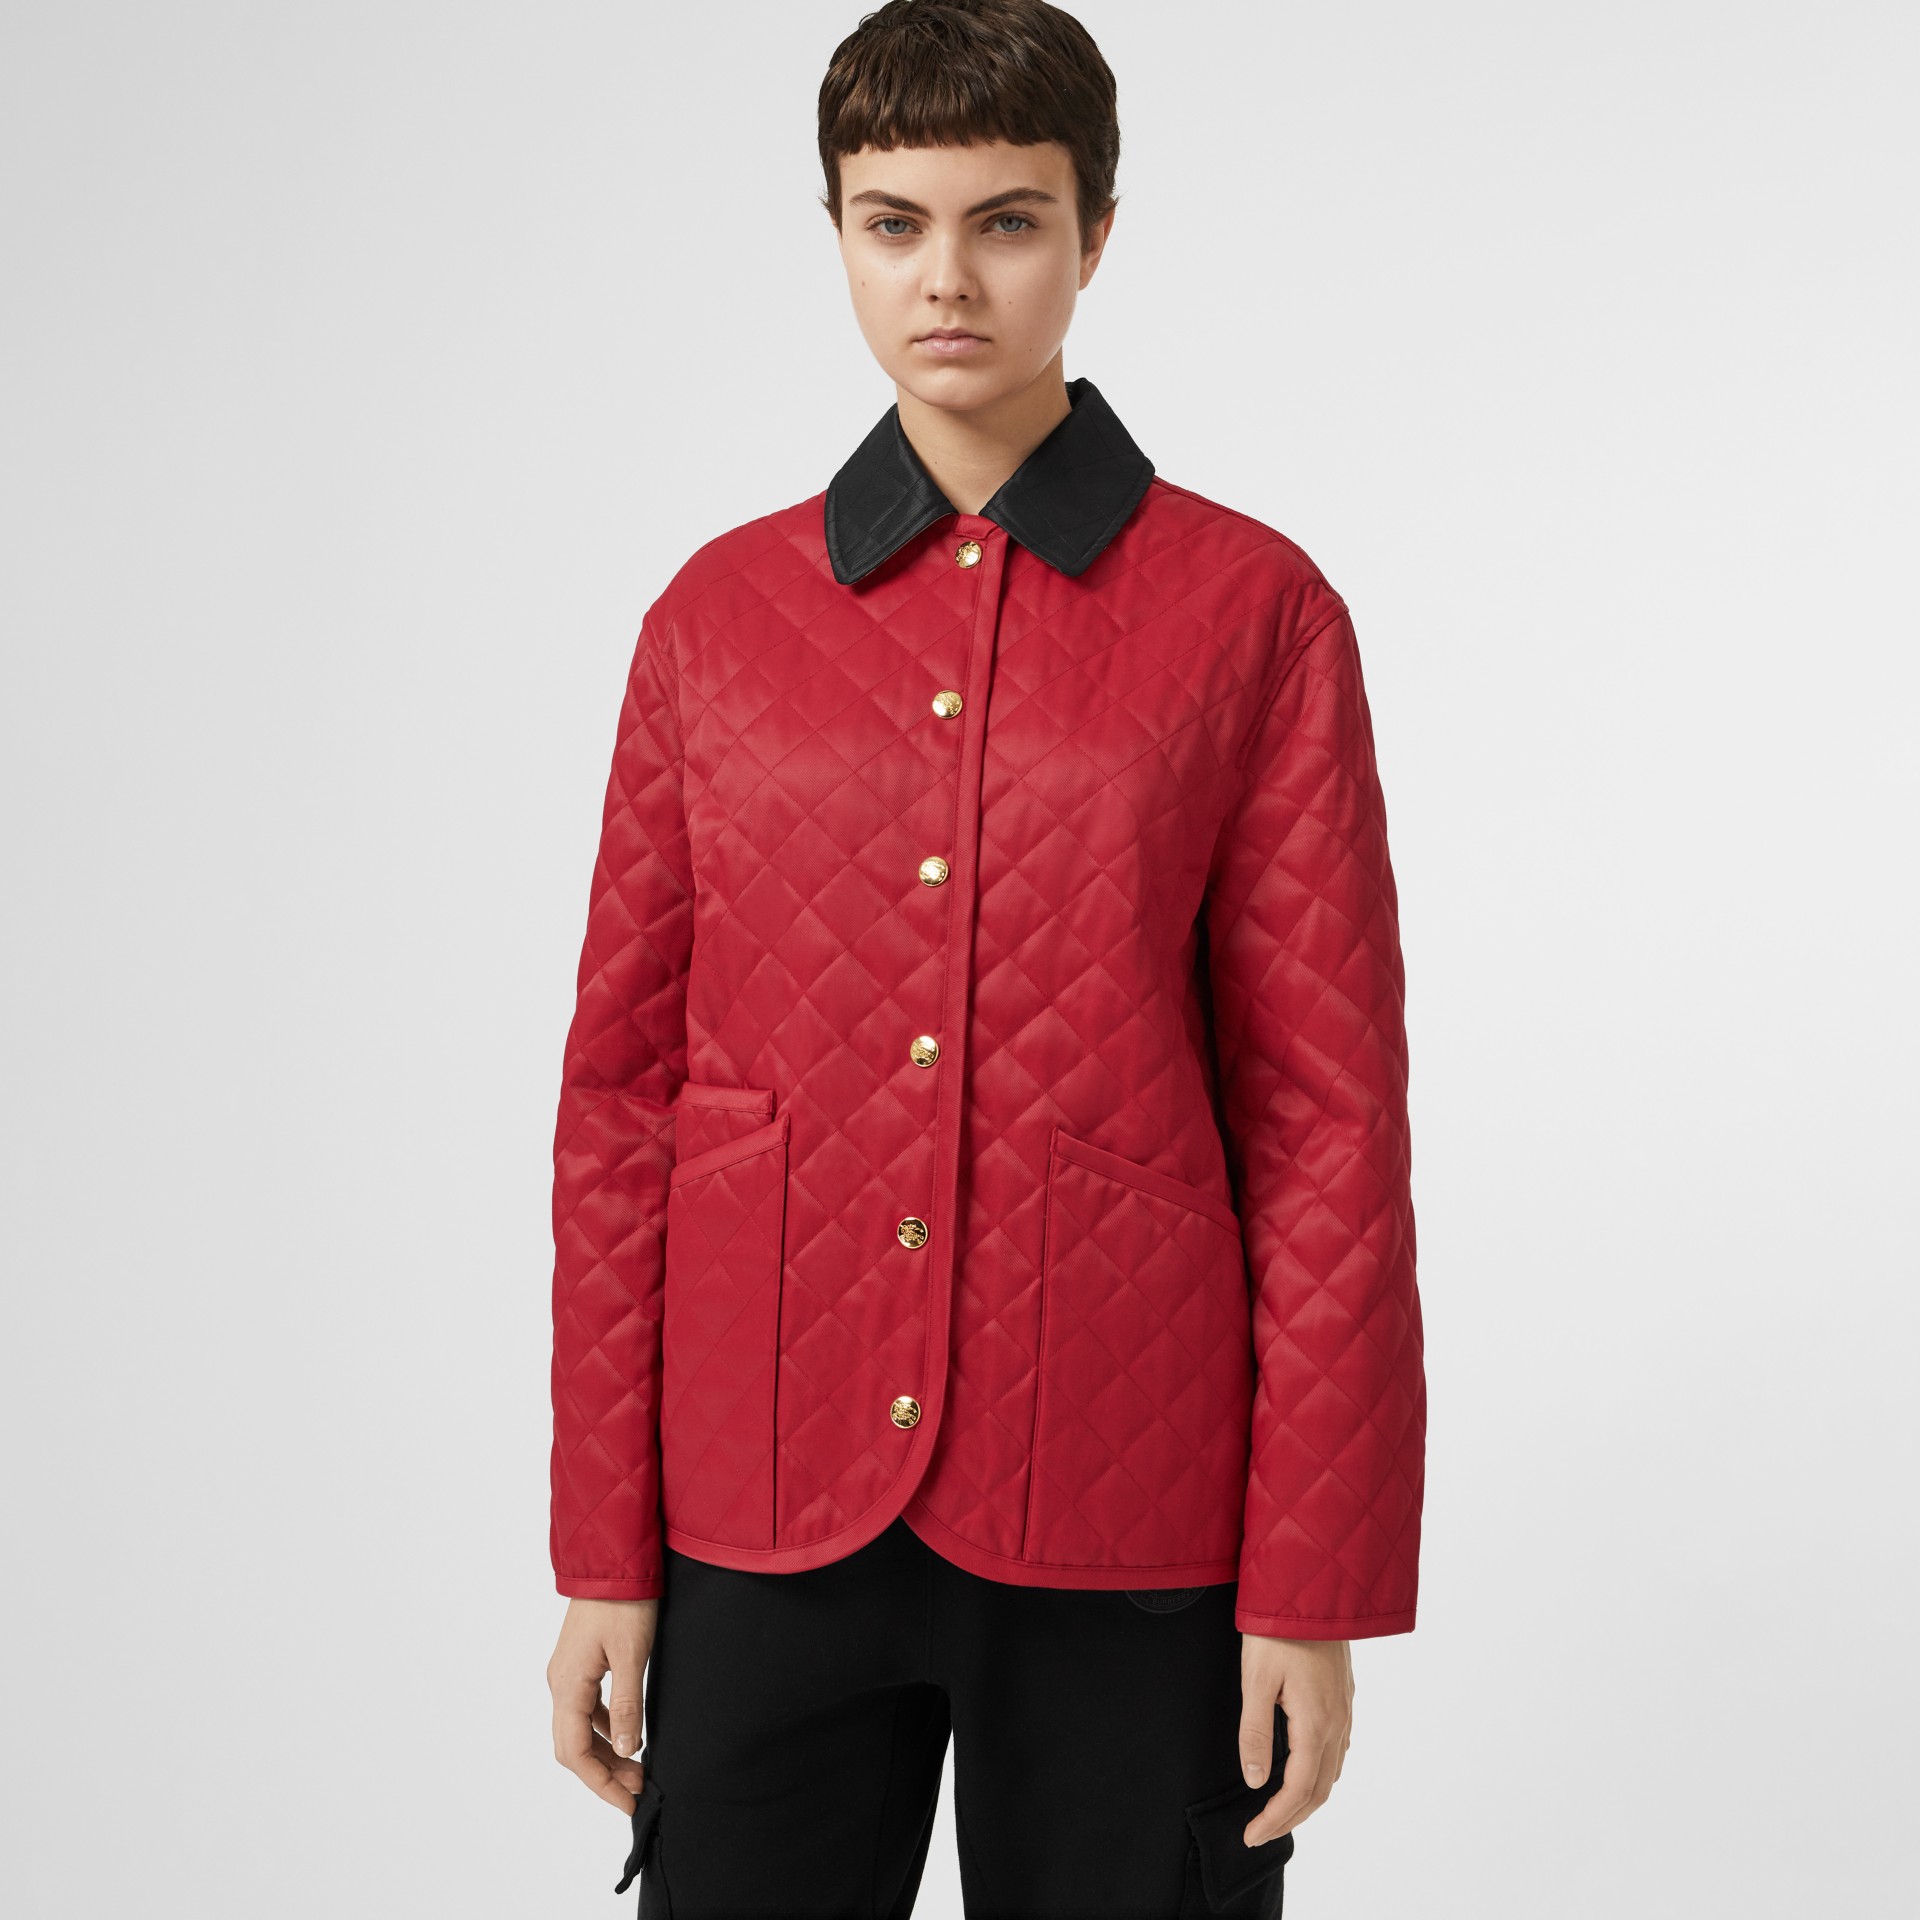 Diamond Quilted Barn Jacket in Red - Women | Burberry United States